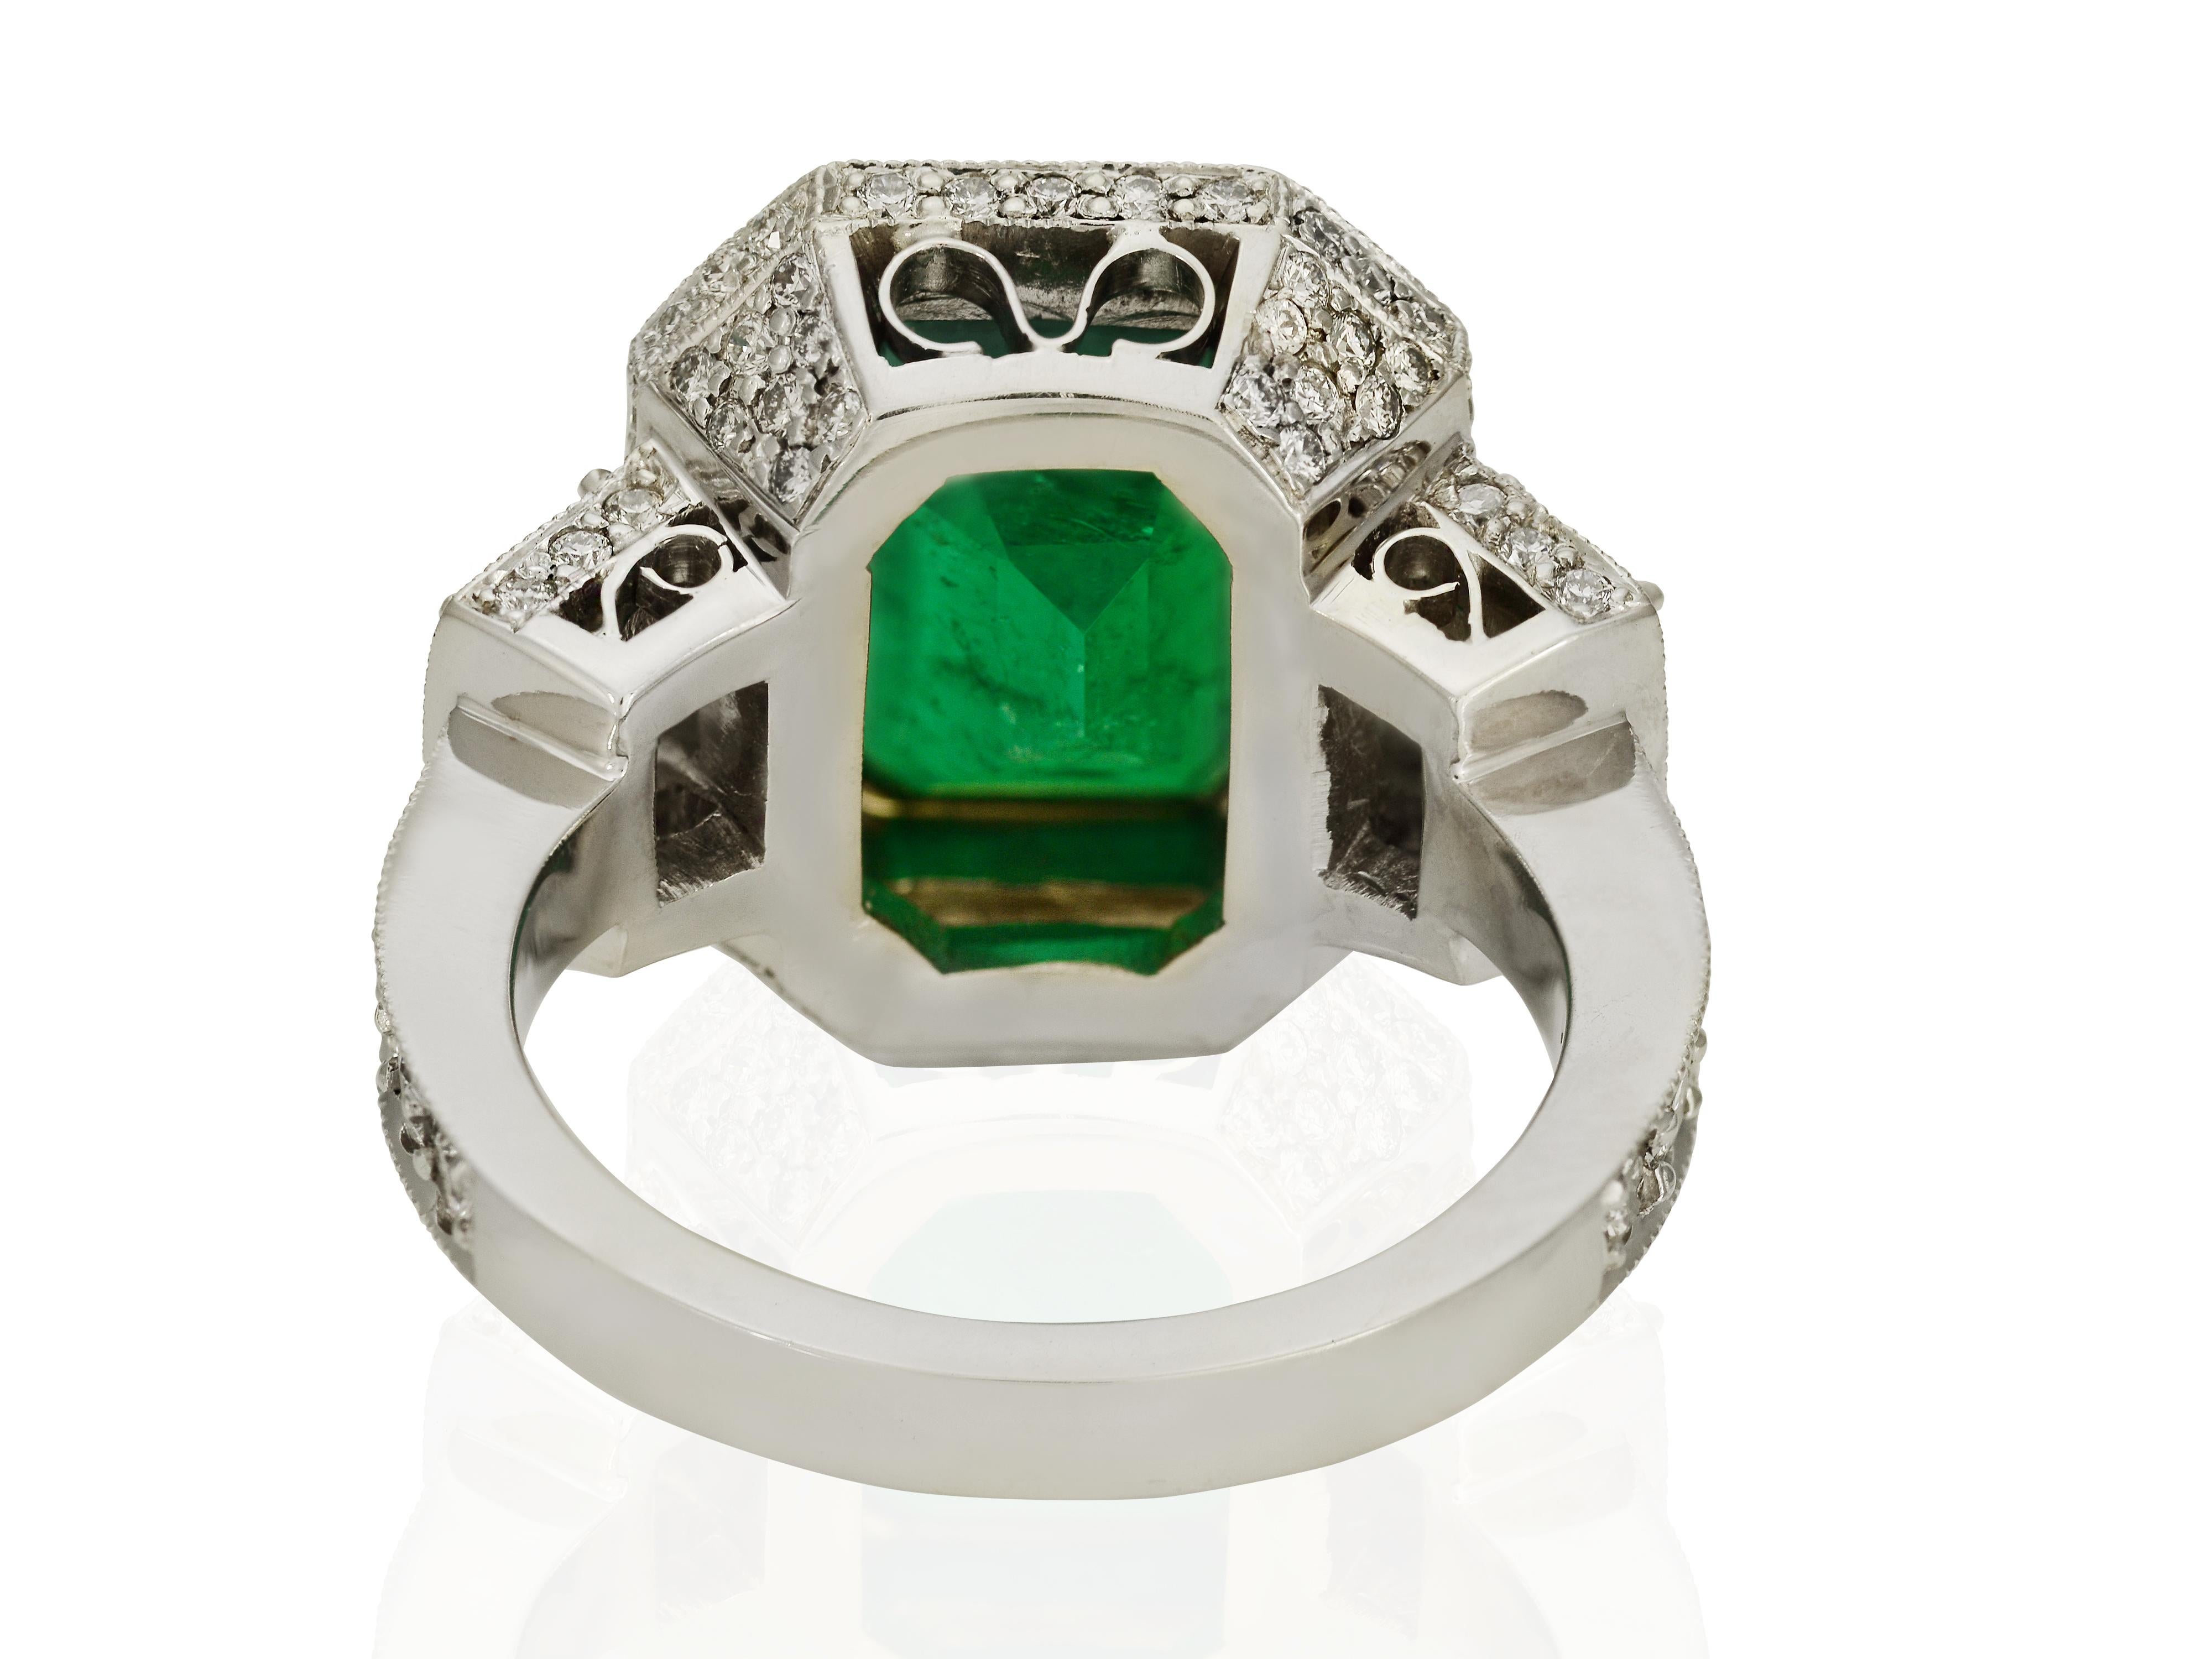 Emerald Cut GIA Report Certified 5.13 Carat Colombian Emerald Cocktail Ring For Sale